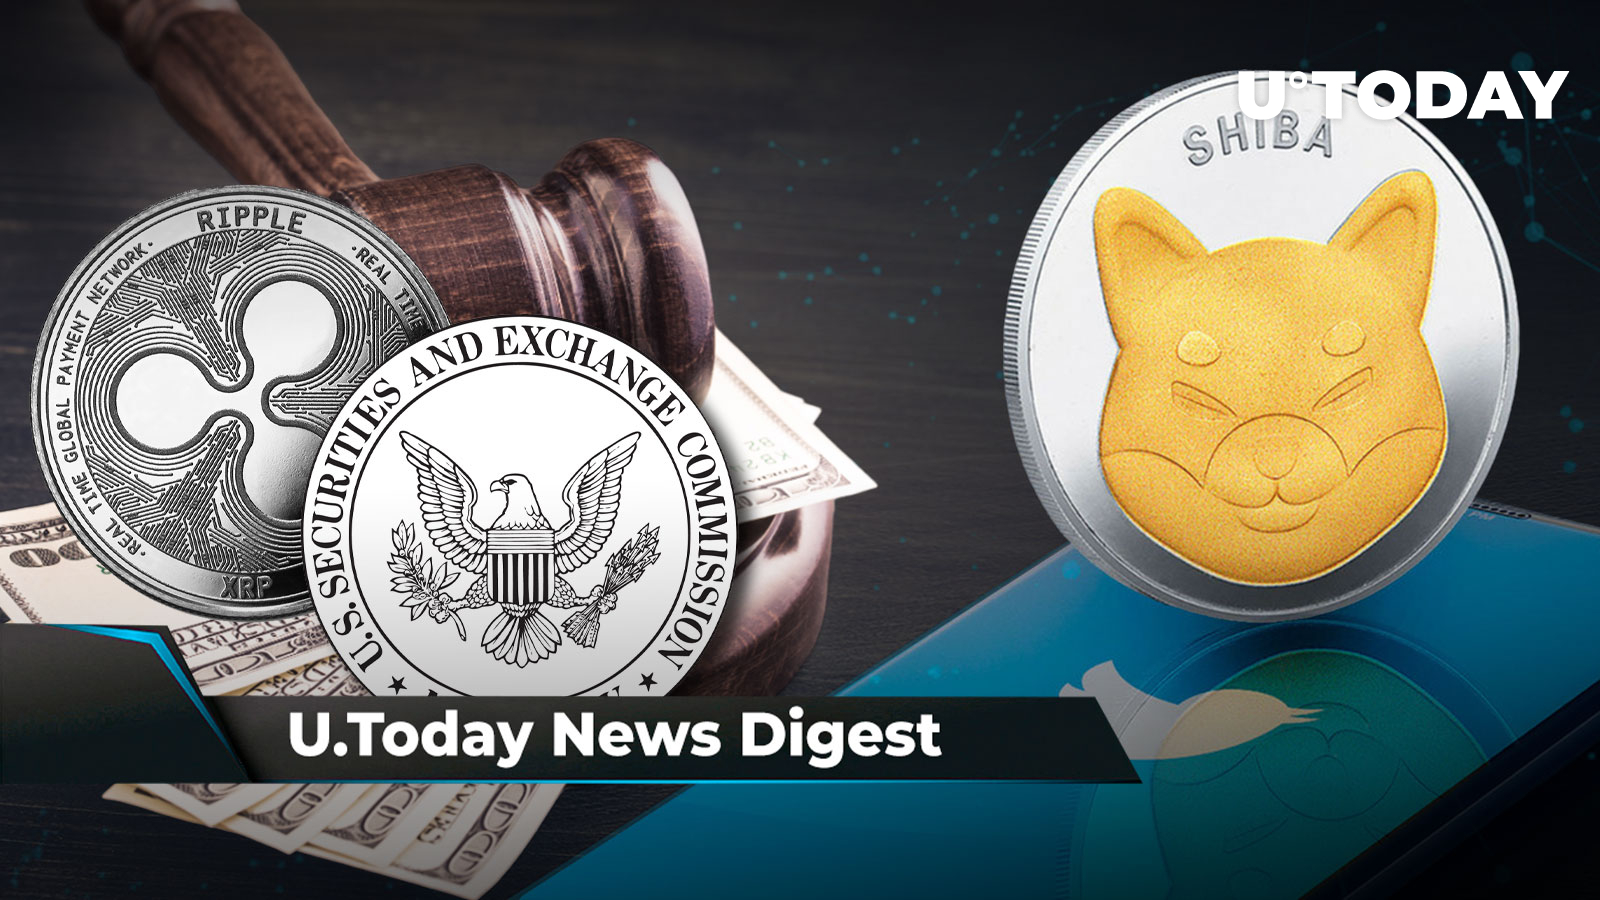 Lead SHIB Dev Apologizes for Countdown Tweet, Ripple Ally Objects to  Million SEC Fine, SHIB Needs 2% to Reach Important Goal: Crypto News Digest by U.Today